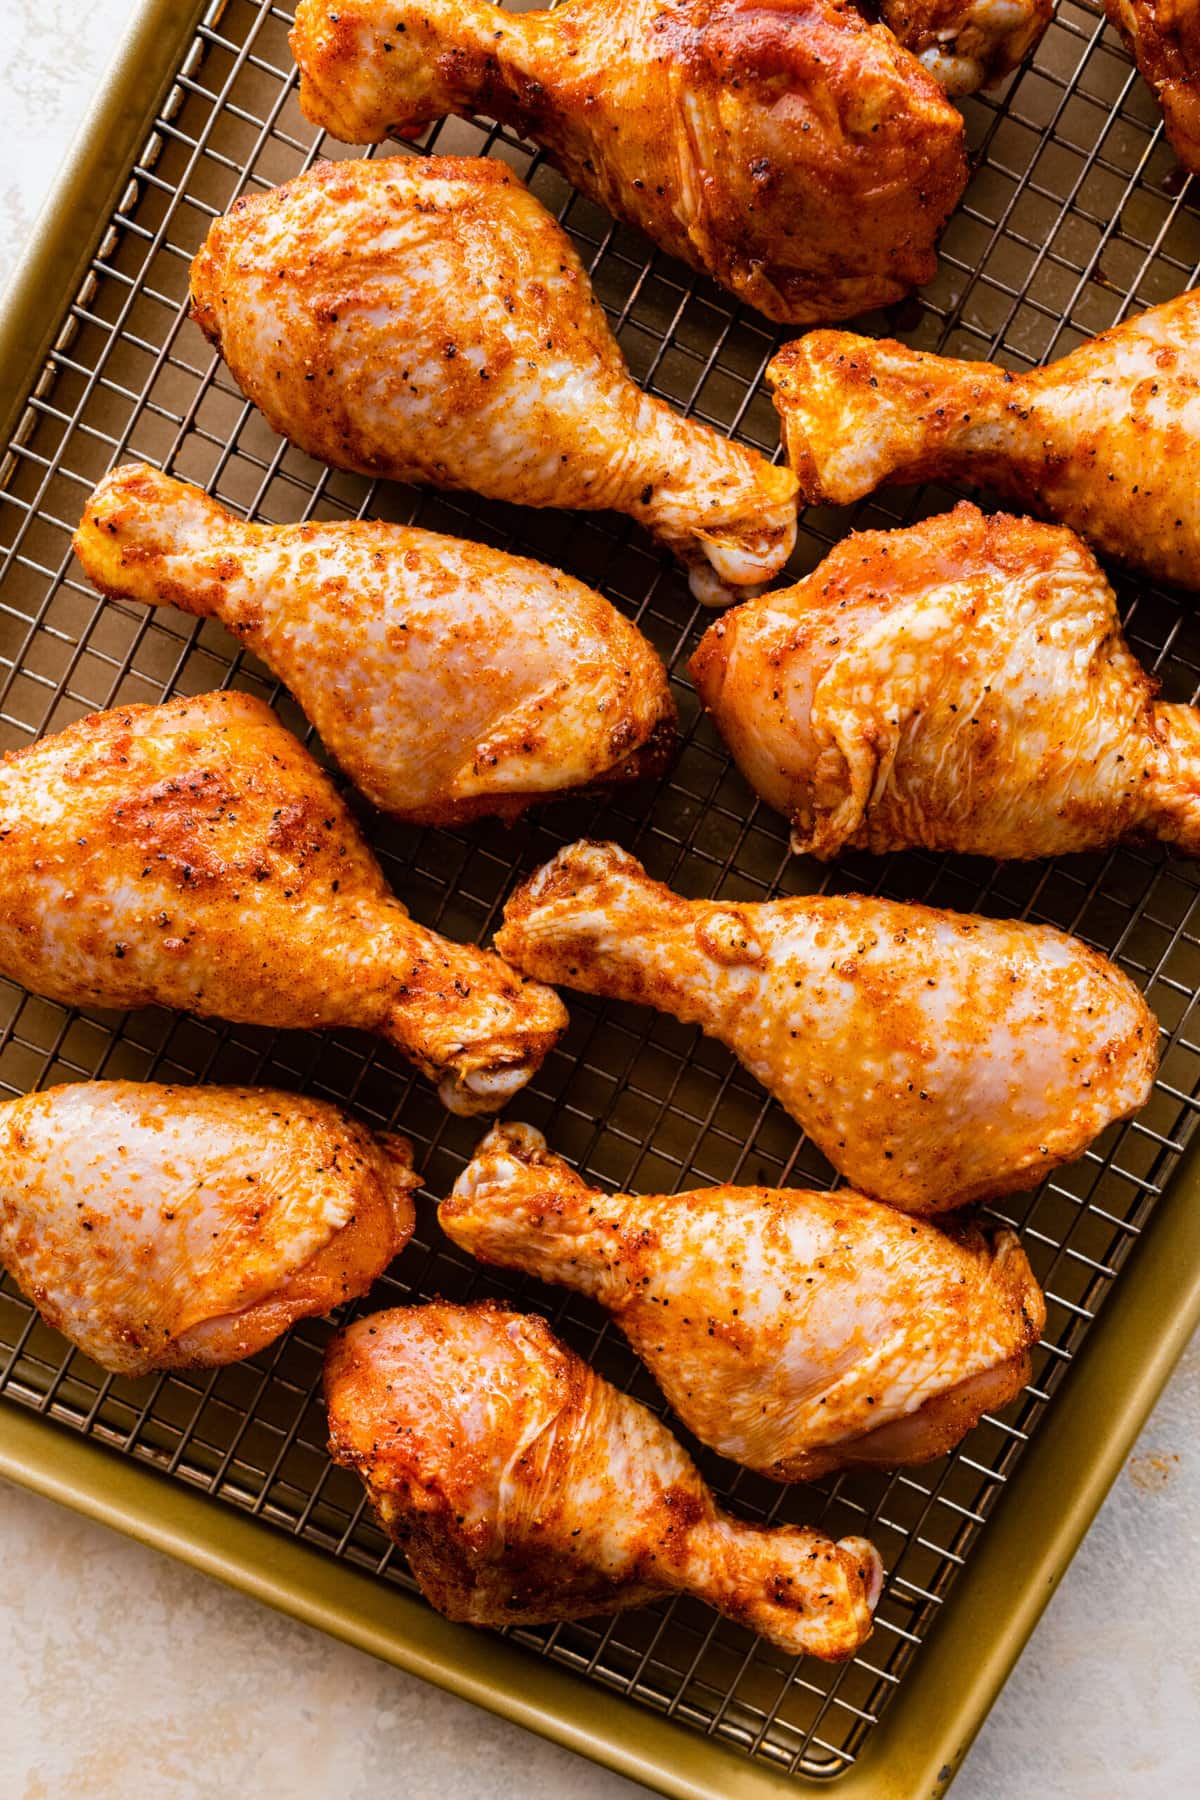 How Long to Bake Chicken Drumsticks at 400- placing the drumsticks on a sheet pan with the wore rack on top.